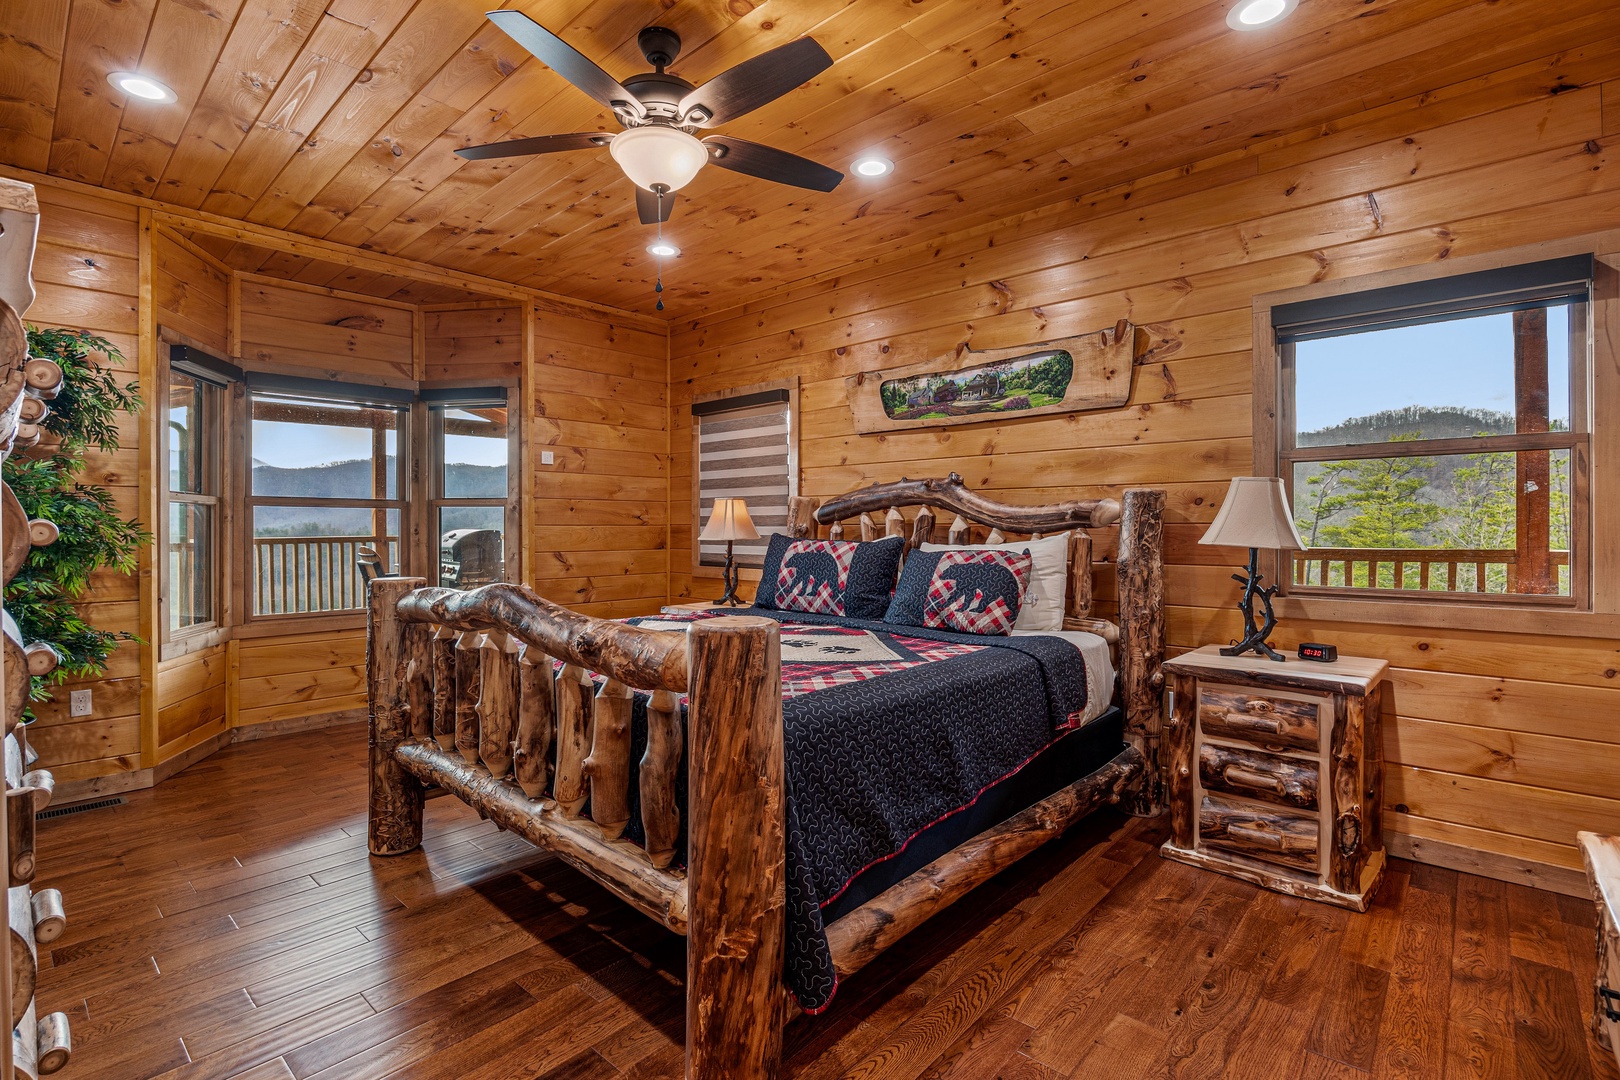 King log bed at Four Seasons Grand, a 5 bedroom cabin rental located in Pigeon Forge